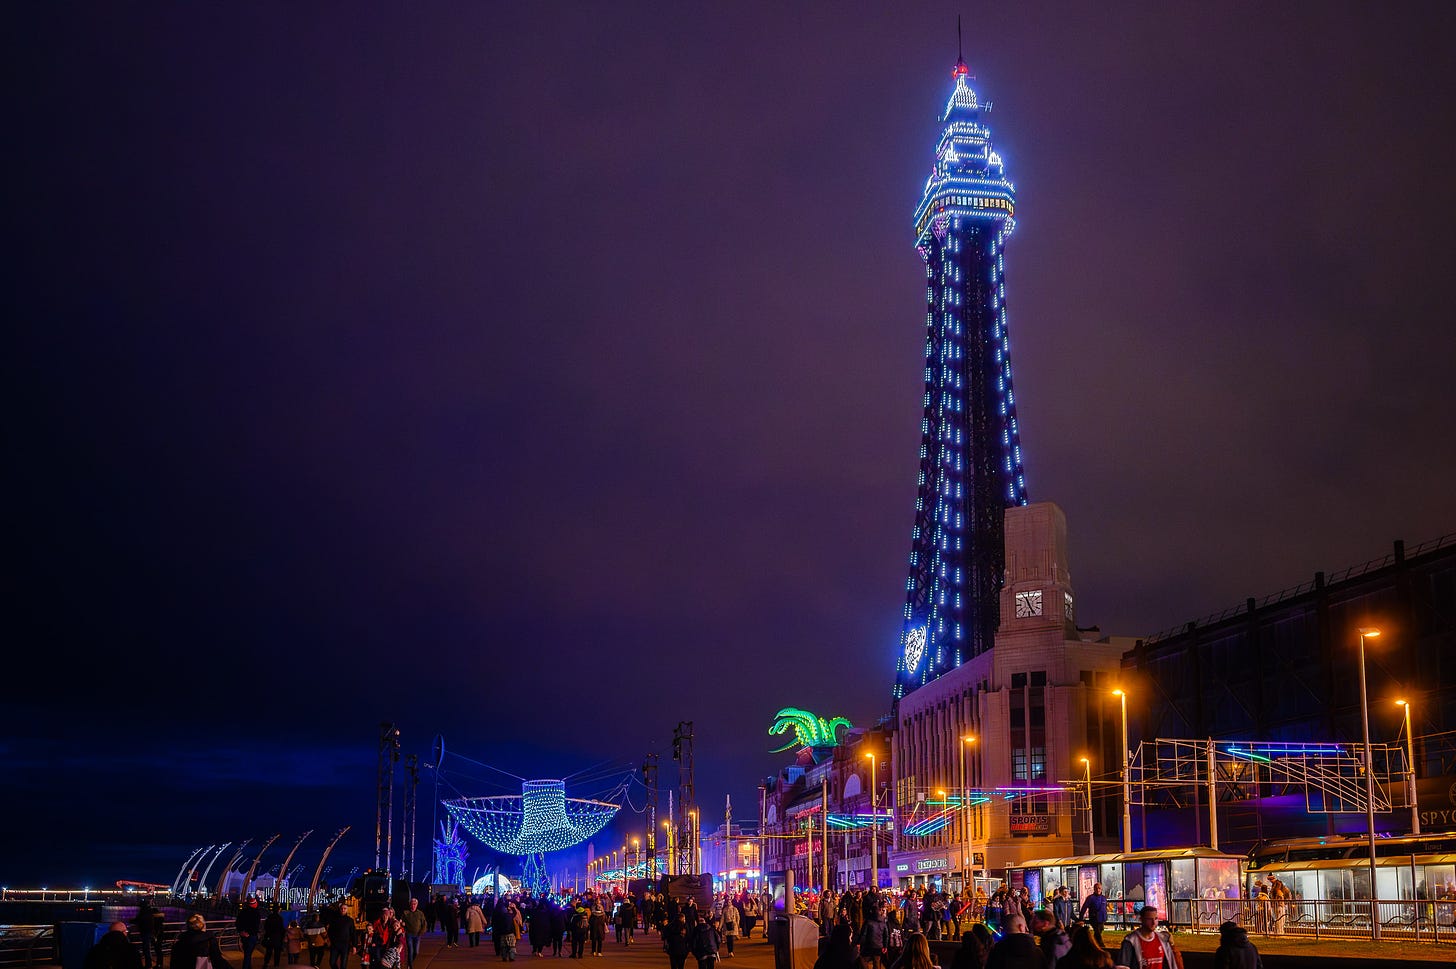 Blackpool Promenade at dusk. A net of colourful LED lights hangs over the prom as people walk beneath. In the distance Blackpool Tower is lit up.